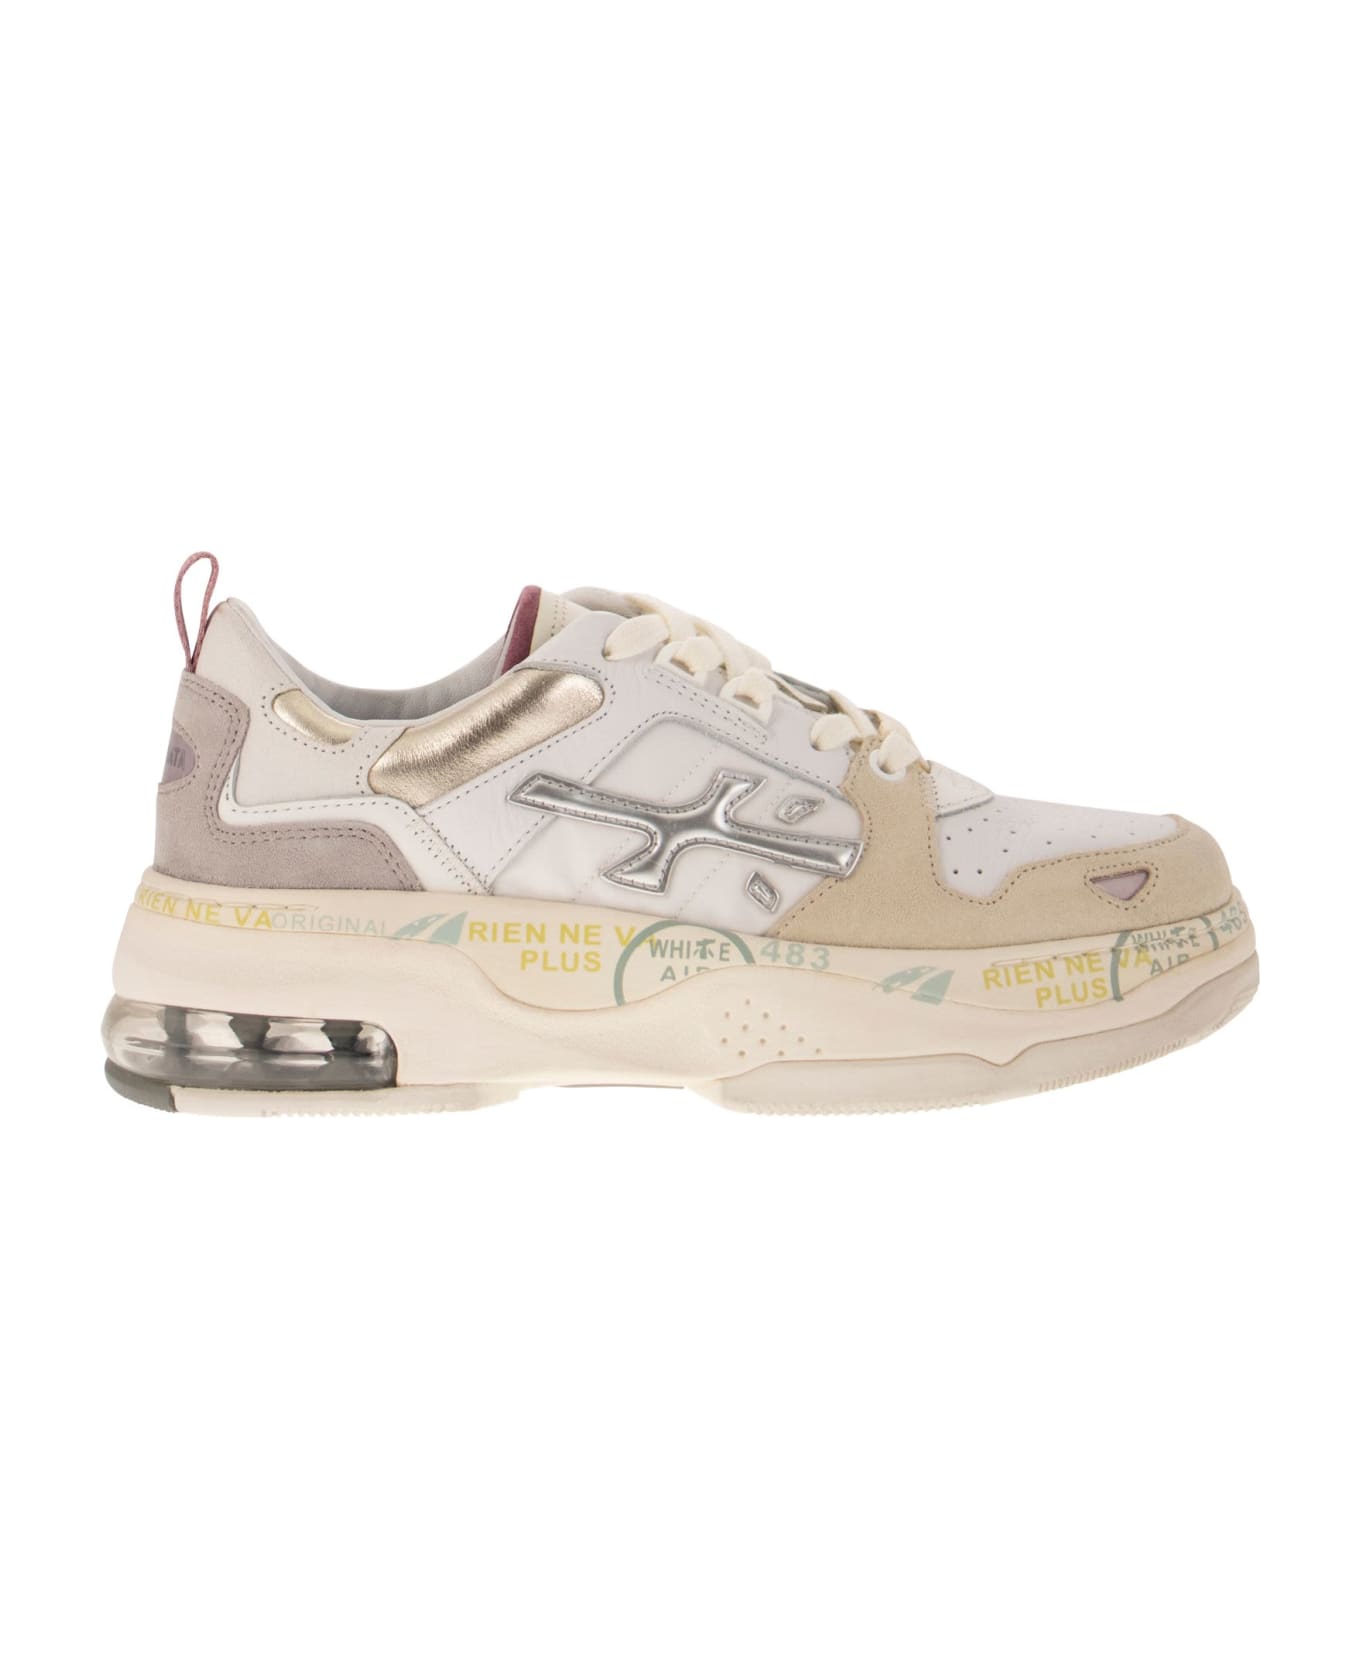 Premiata 'draked' Multicolor Leather Blend Sneakers - White/ivory スニーカー